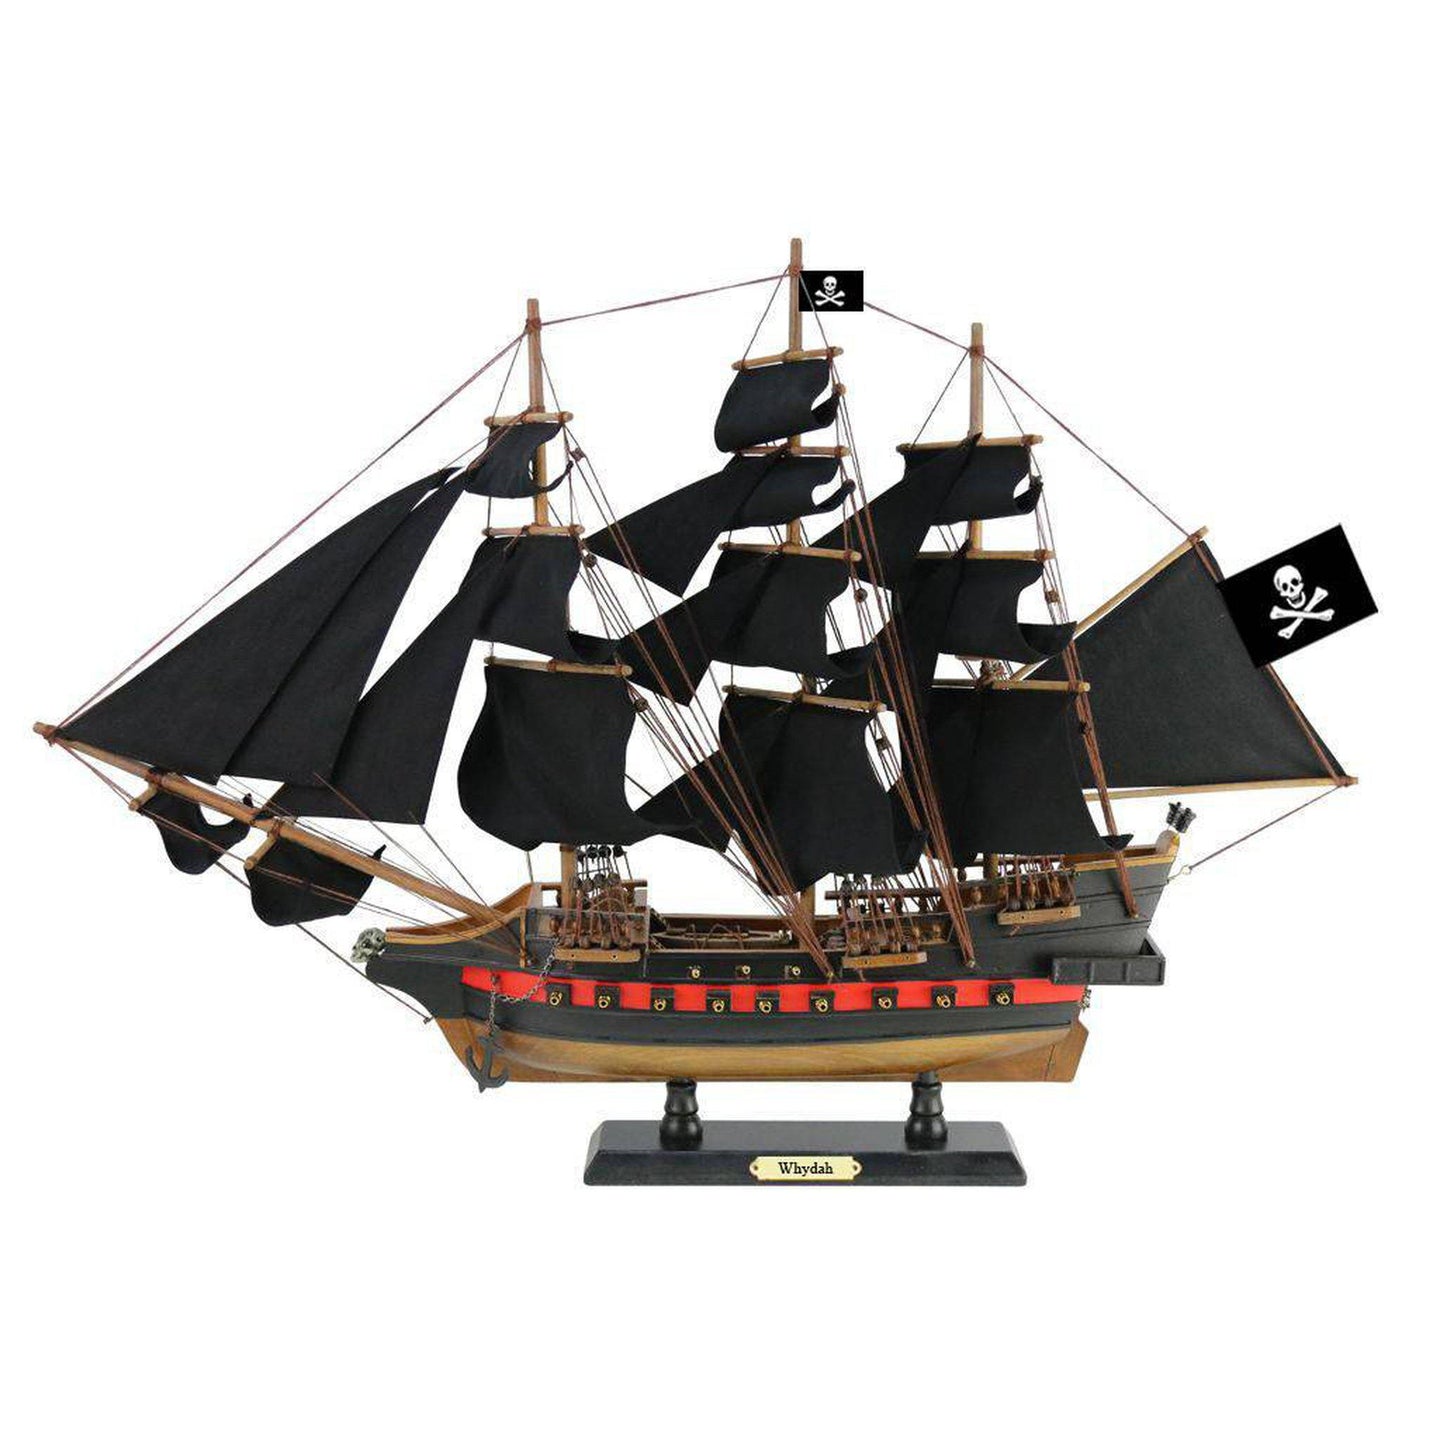 Handcrafted Model Ships Wooden Whydah Gally Black Sails Limited Model Pirate Ship 26